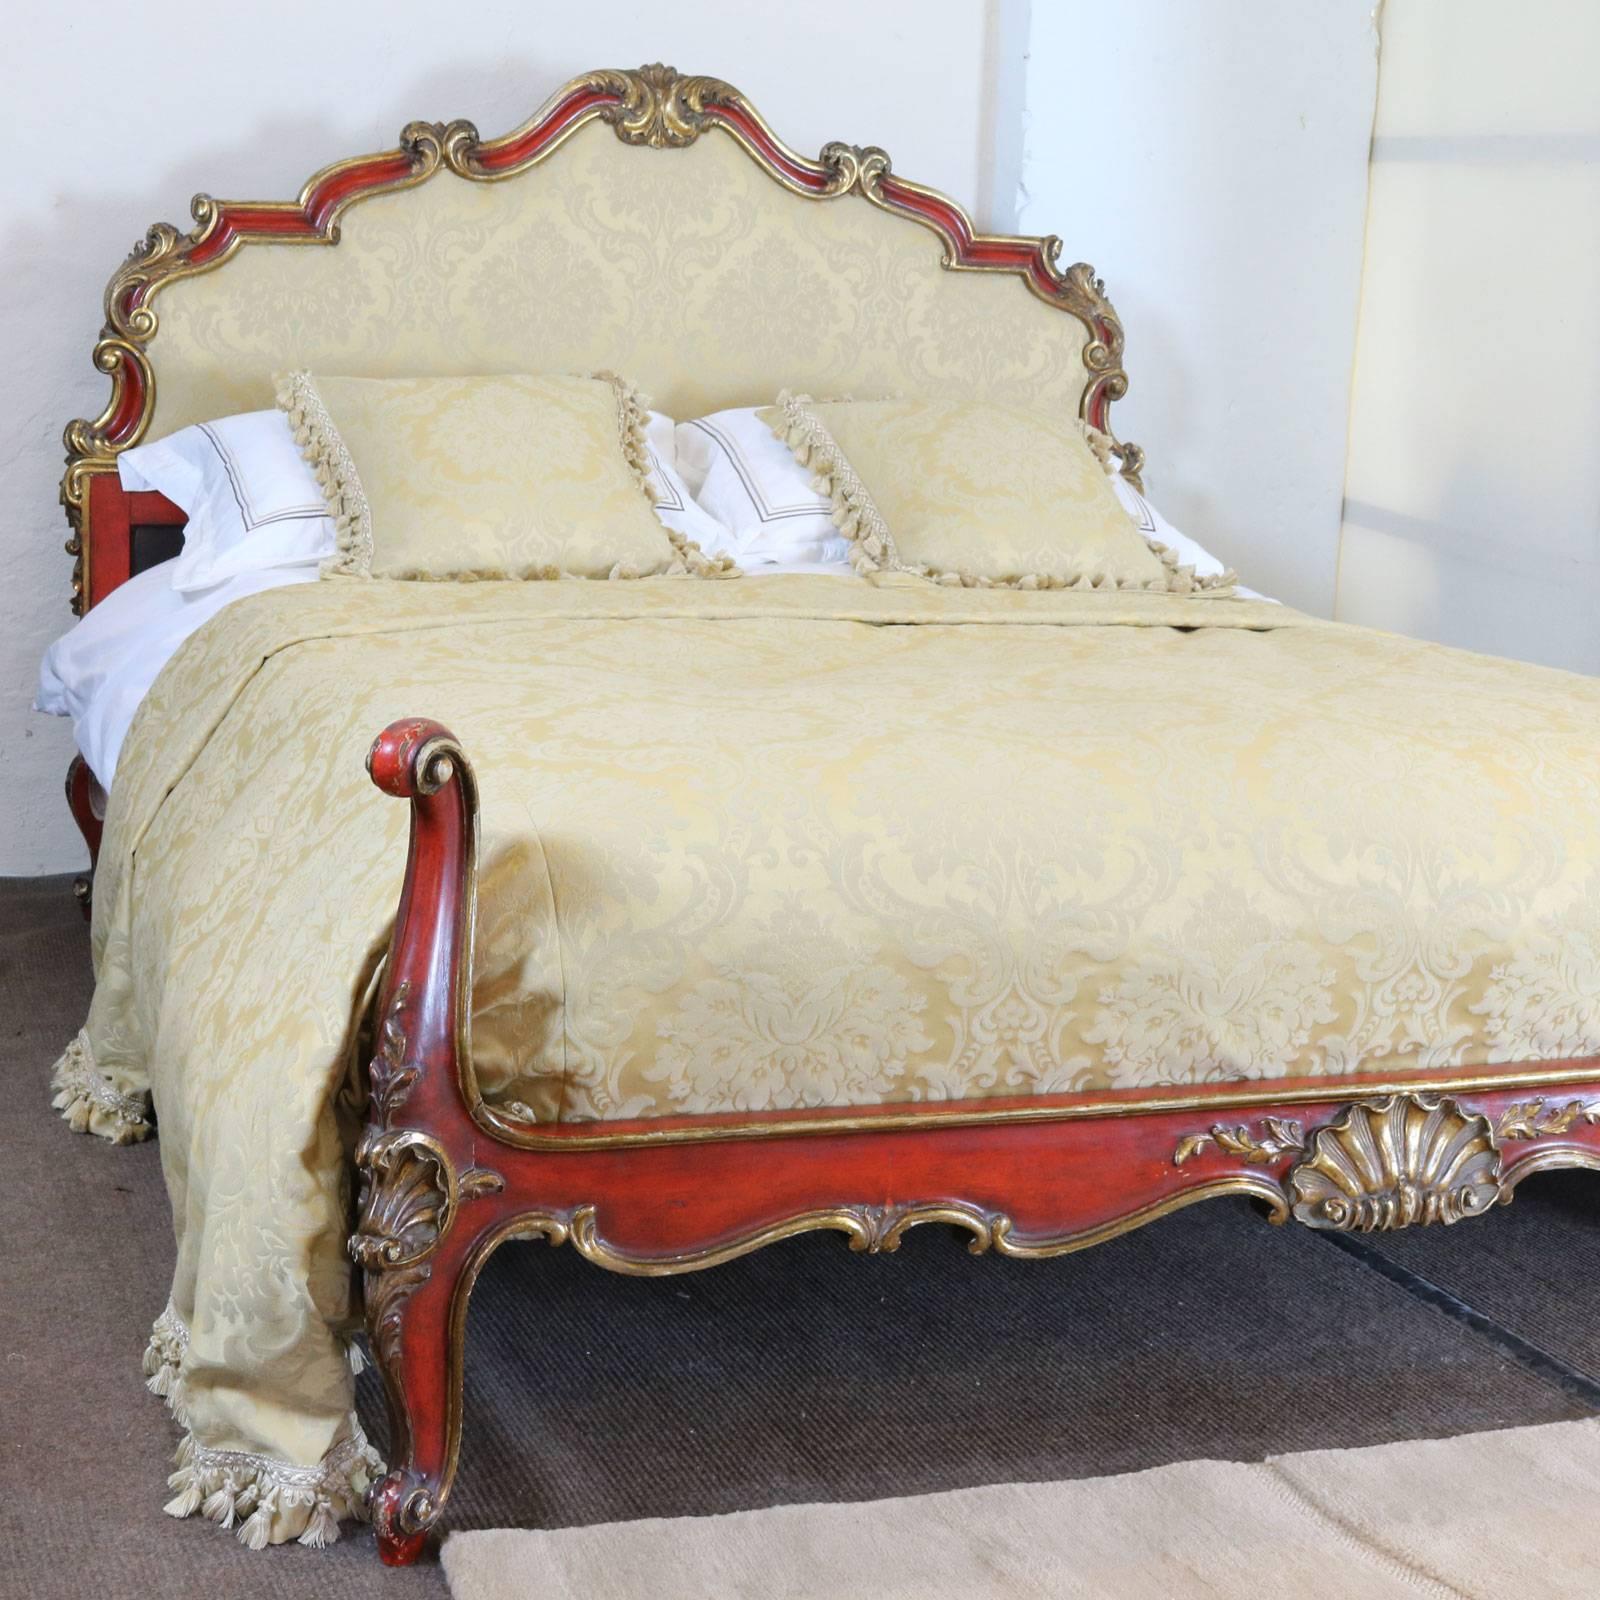 Wide Italian bed with red painted frame and gilded carvings. The cream damask upholstered backboard has an ornate frame and the low foot board has torchon feet.

This bed accepts an extra-wide 63 inch (5ft 3in or 160cm) base and mattress, which